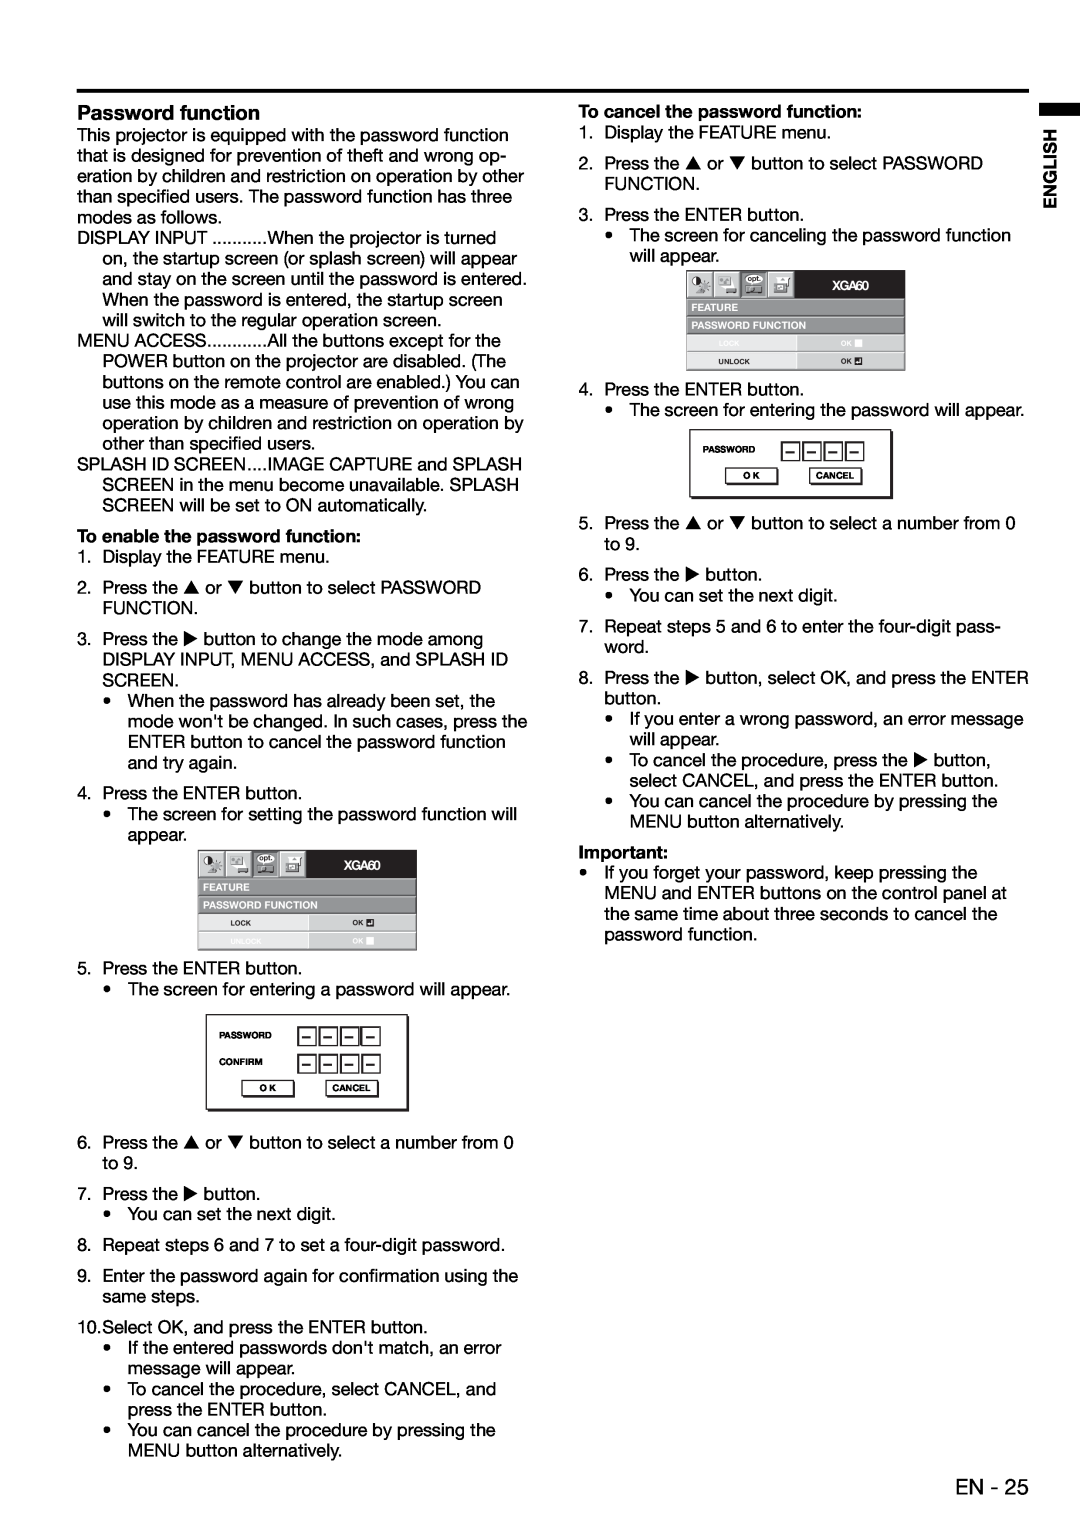 Mitsubishi Electronics XD480U user manual Password function, Press the button, select OK, and press the ENTER 